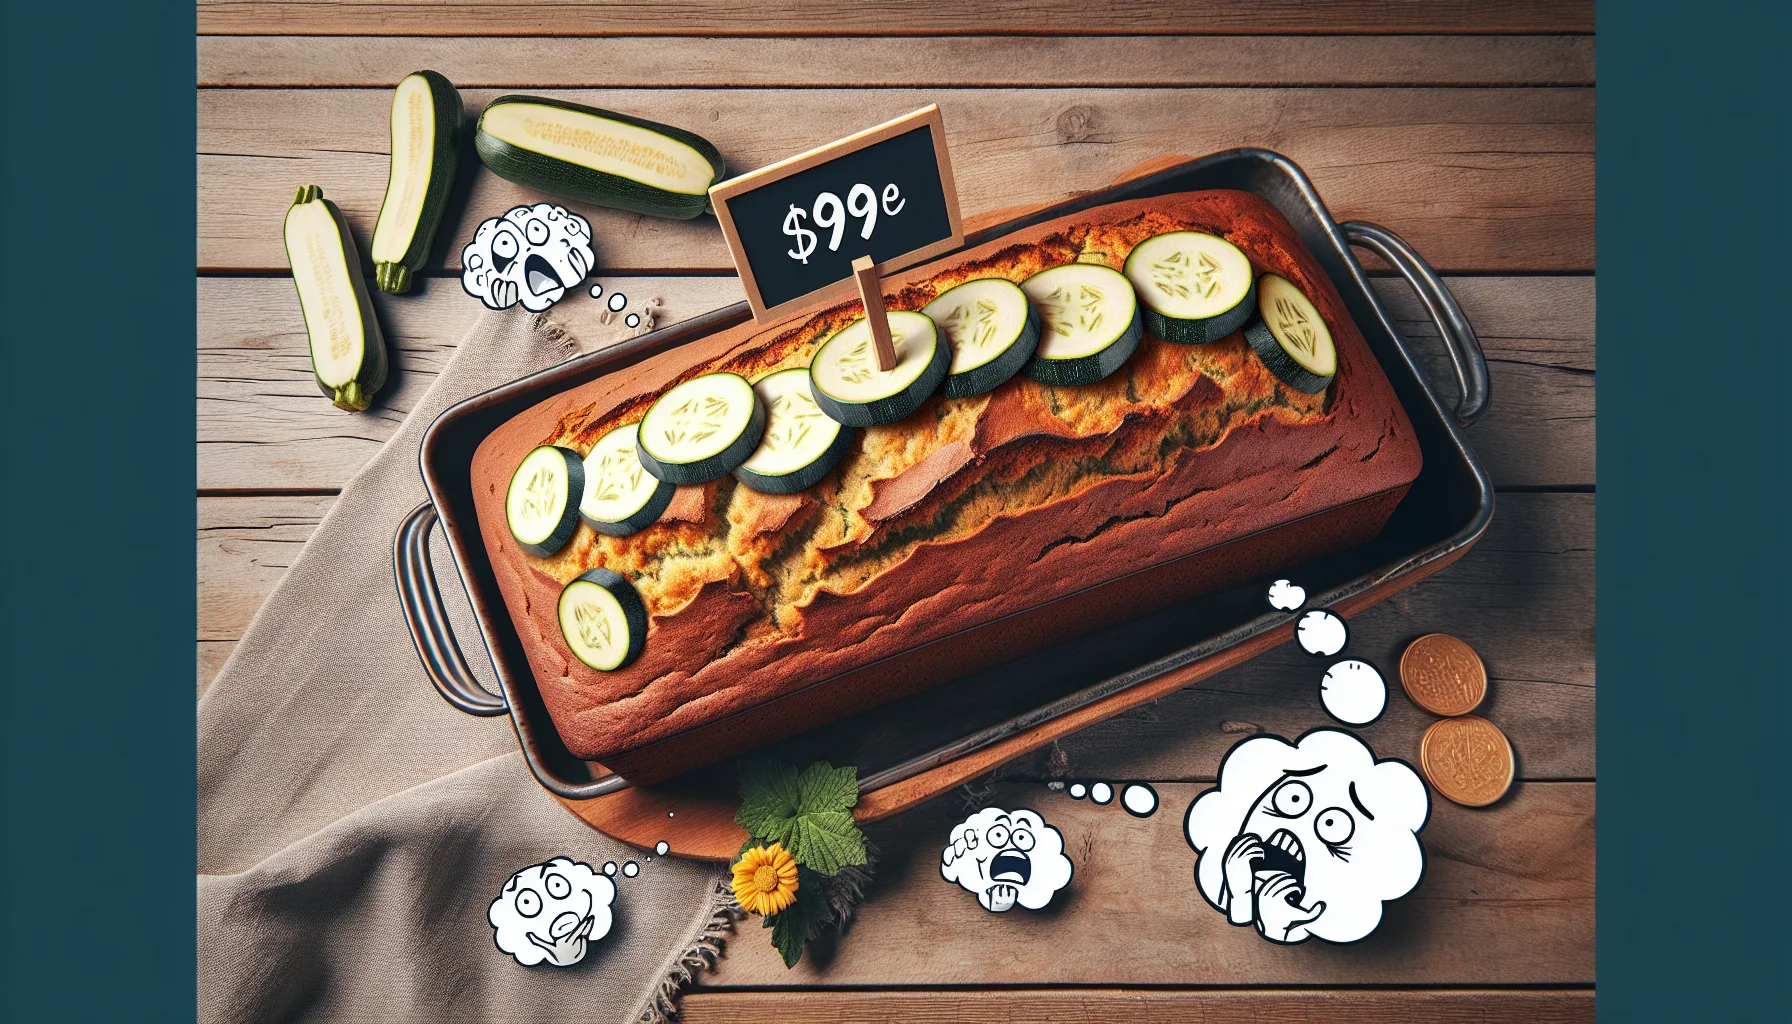 Generate a humorous image of a homemade zucchini bread, made according to a popular recipe. The bread sits in a rustic kitchen setting, adorned with slices of fresh zucchini and decorated with a price tag that is significantly less than what one would expect for such an appetizing and healthy offering. There are cartoonish thought bubbles around, illustrating people's disbelief and surprise at the low cost of this delicious and healthy bread. The image has a realistic style but the situation and reactions are exaggerated for comedic effect.